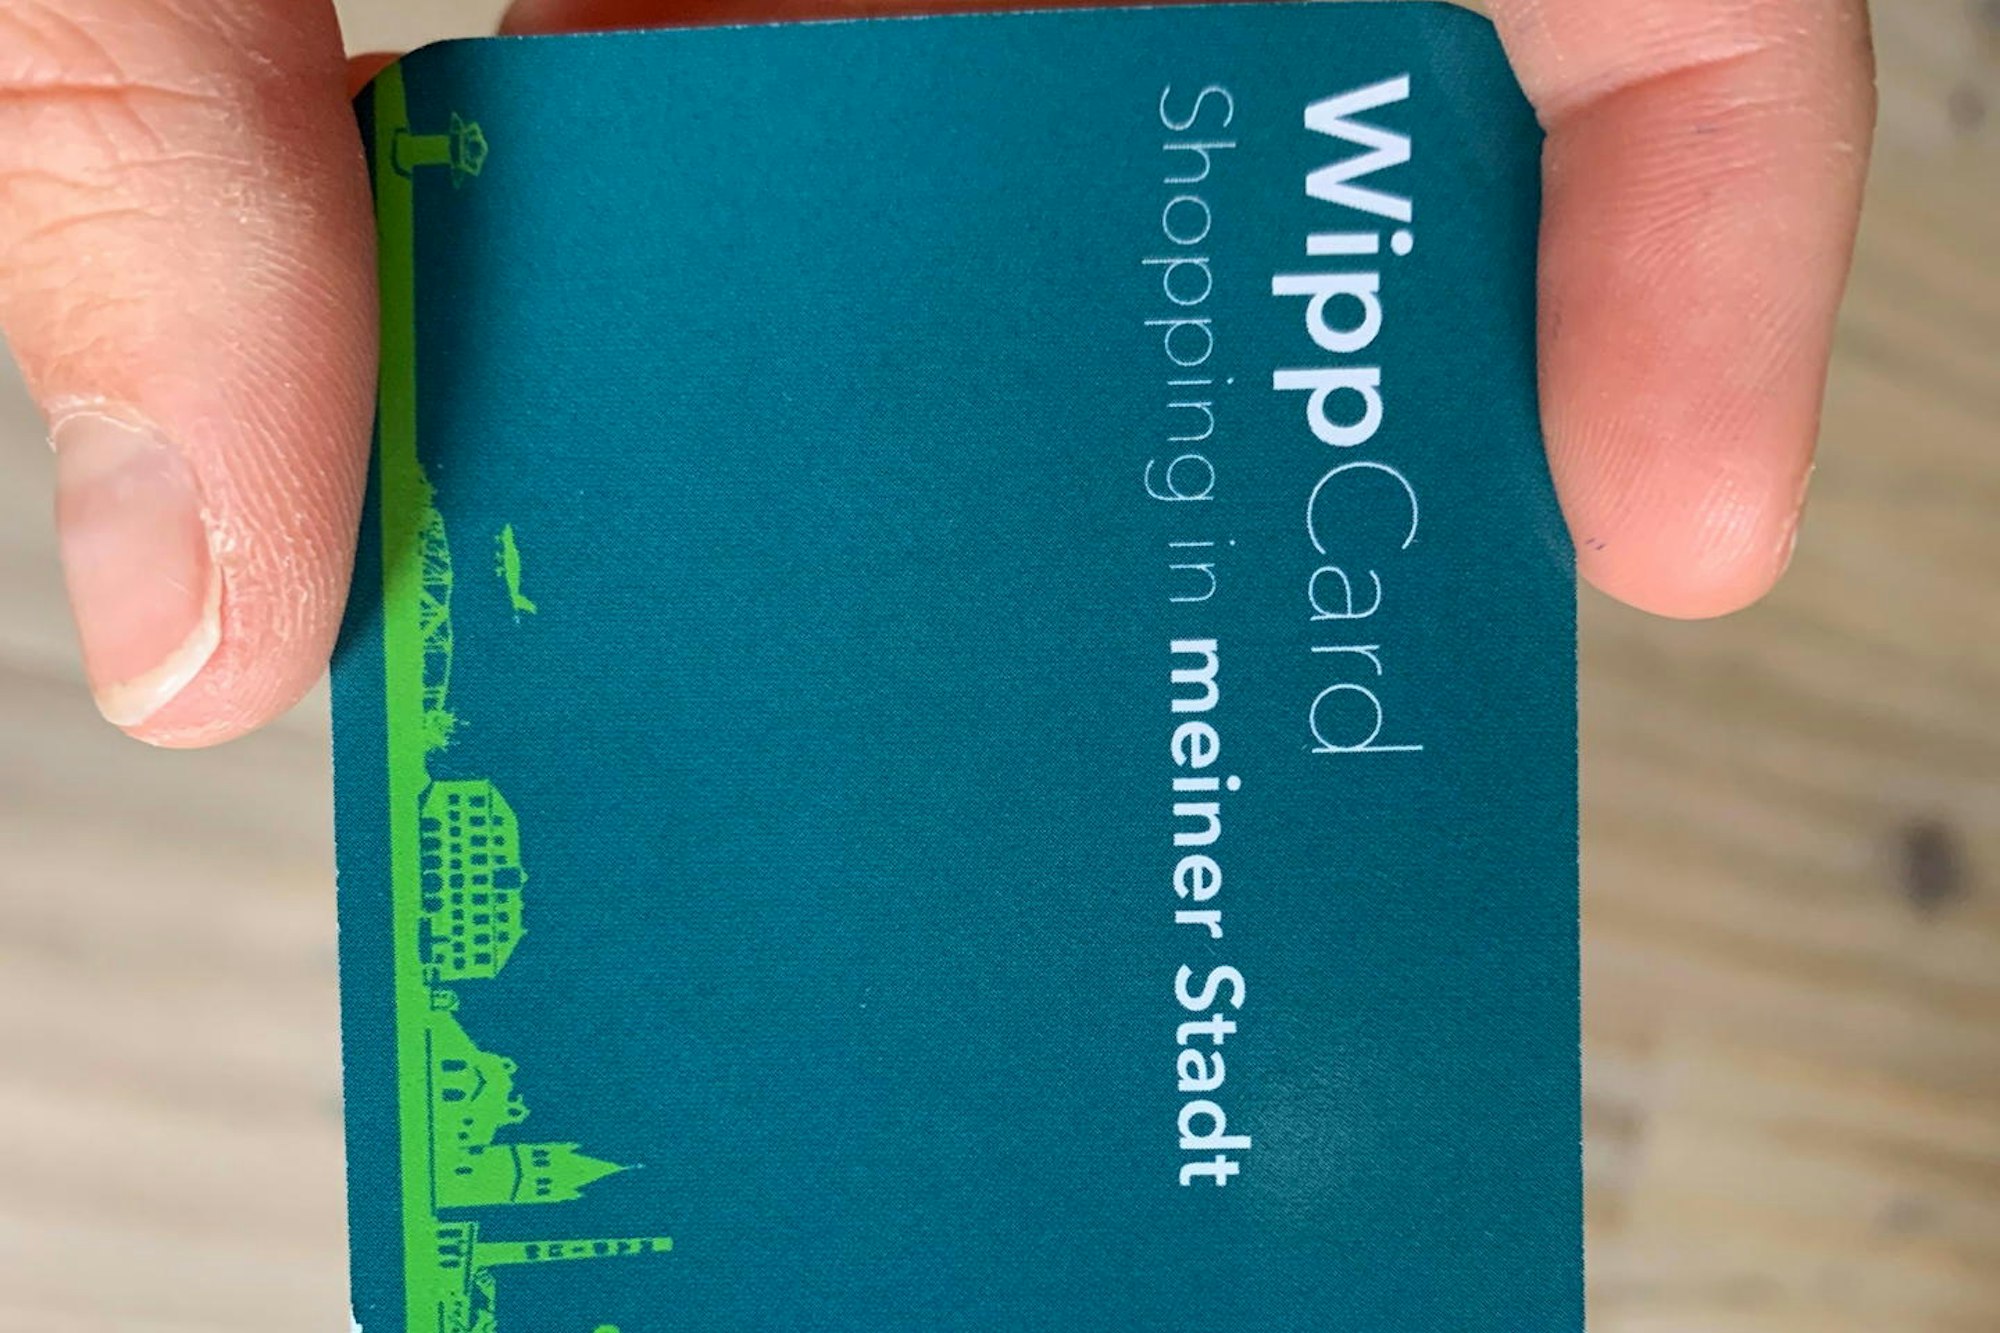 Wippcard